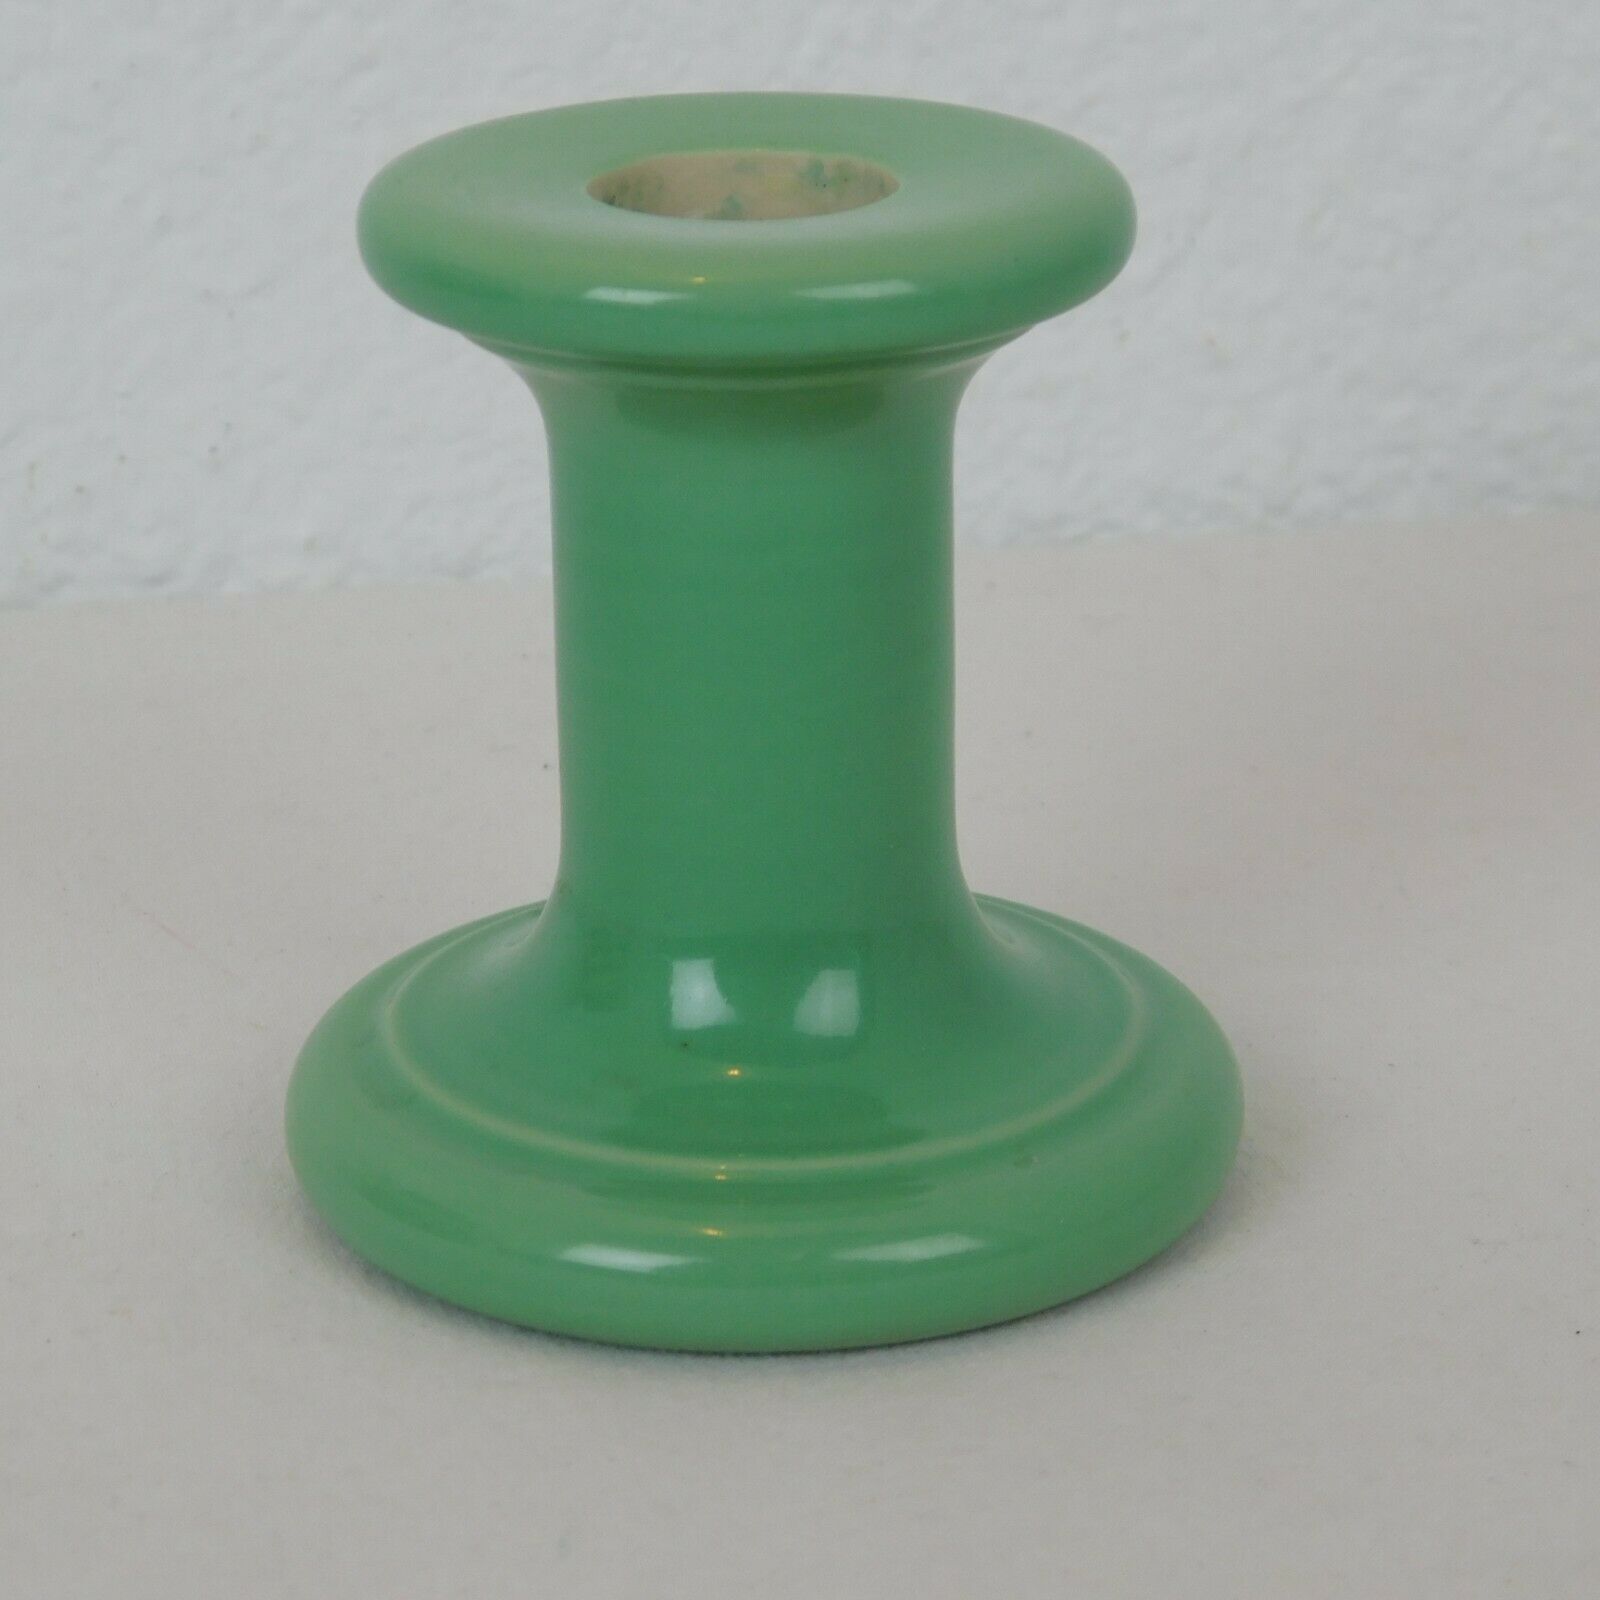 Doulton Mint Green Candlestick Holder England Ceramic Vintage 3.25" High Glossy - £11.42 GBP